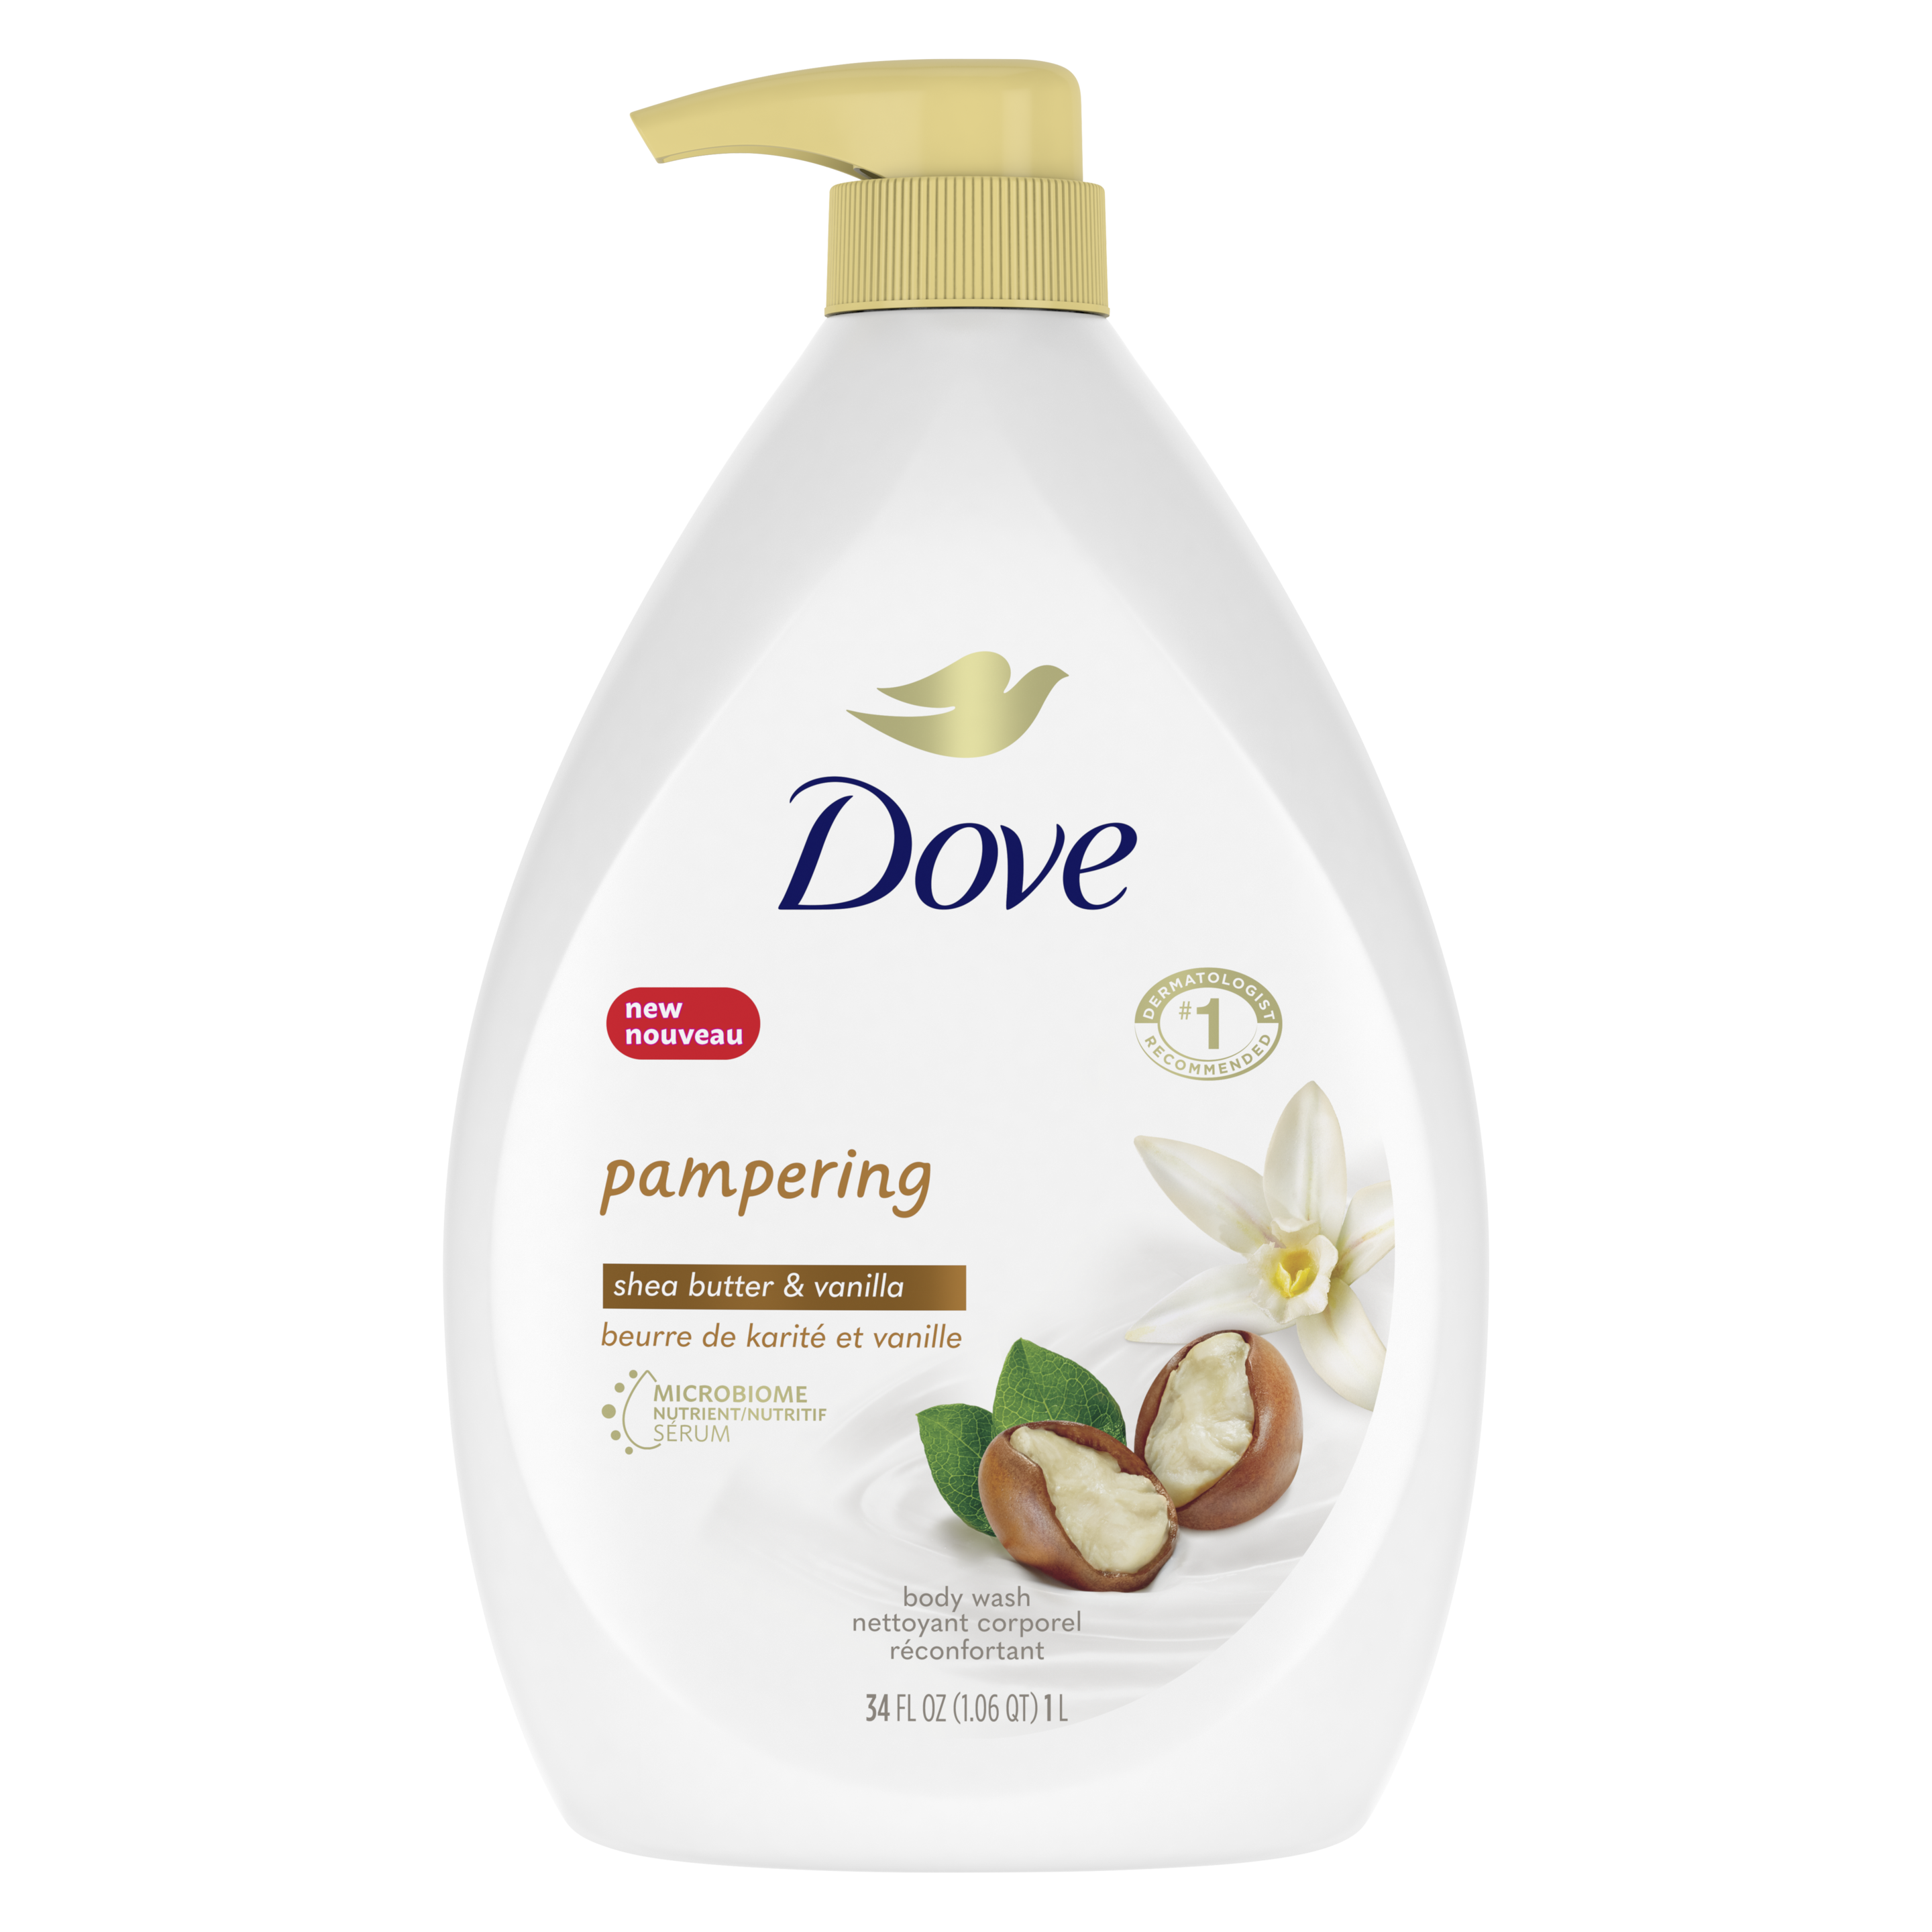 dove purely pampering nourishing body wash